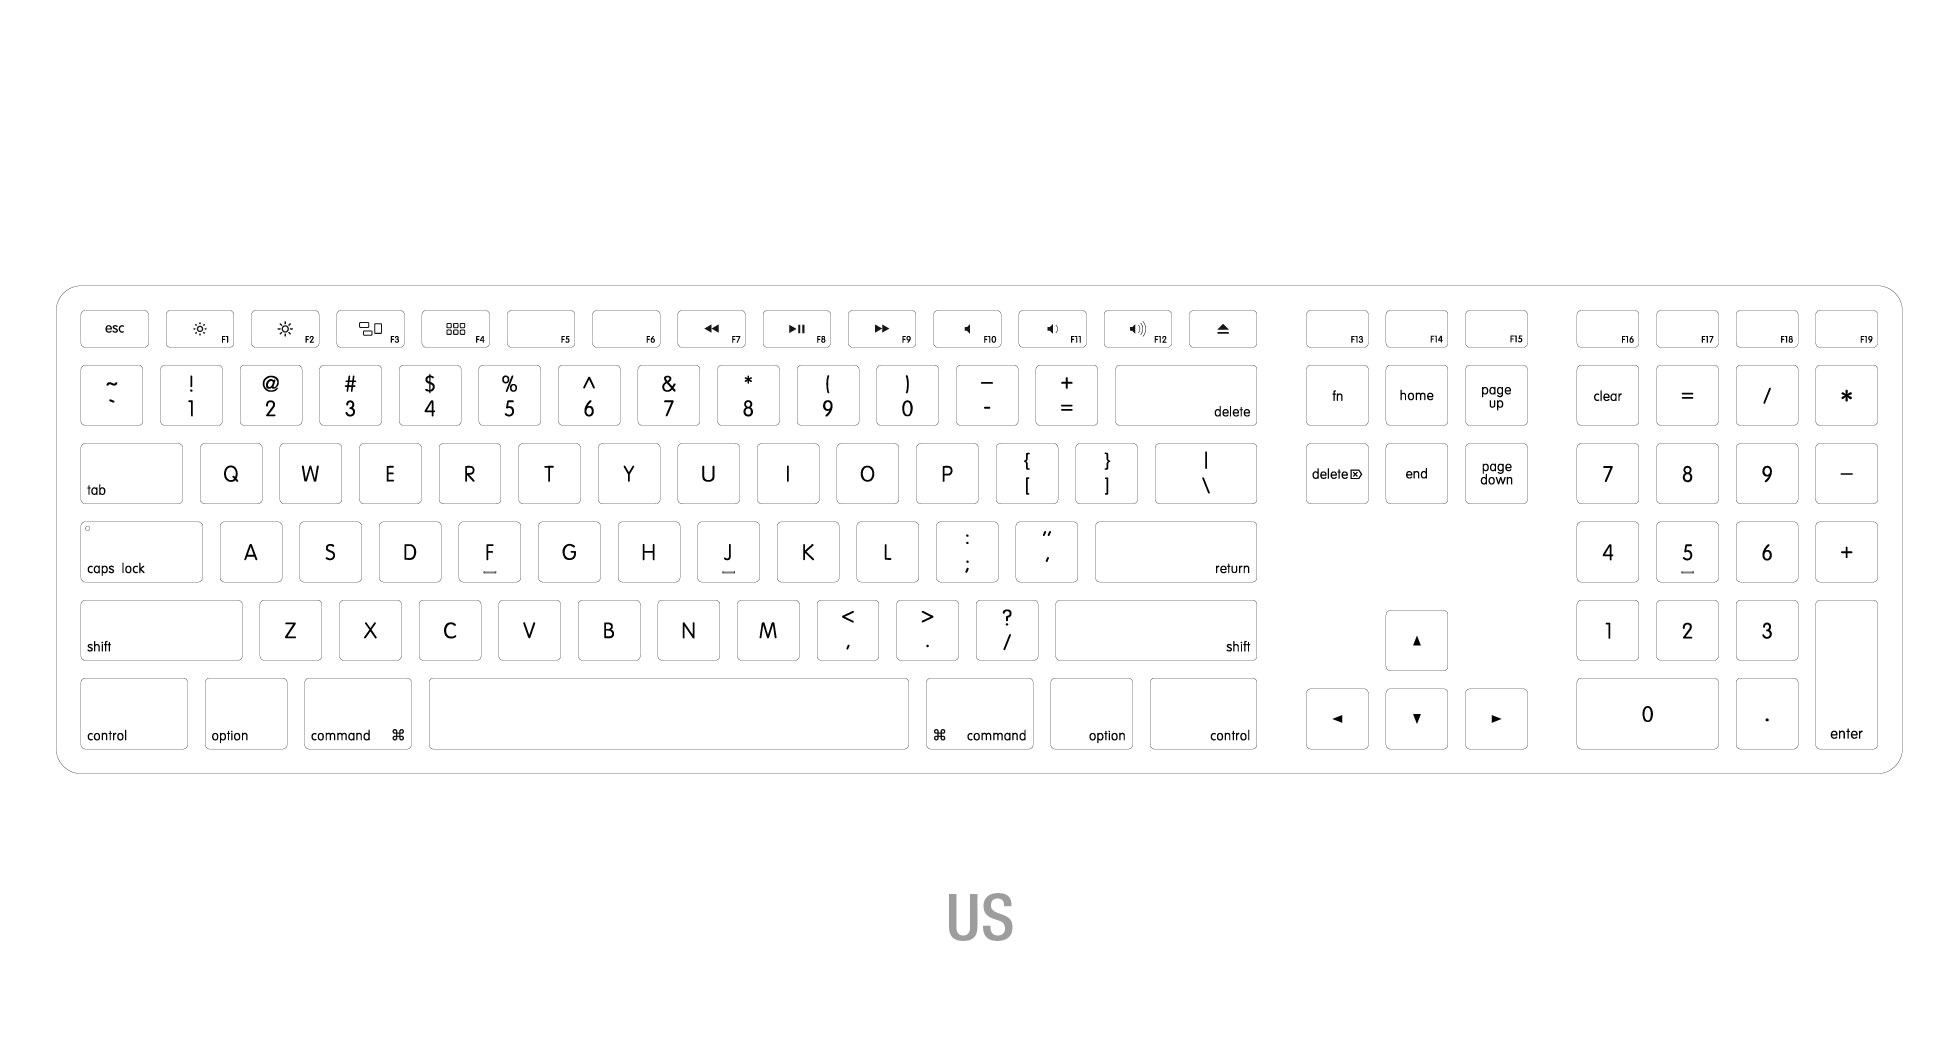 Matias Aluminum Extended USB Keyboard US-Layout for Mac OS